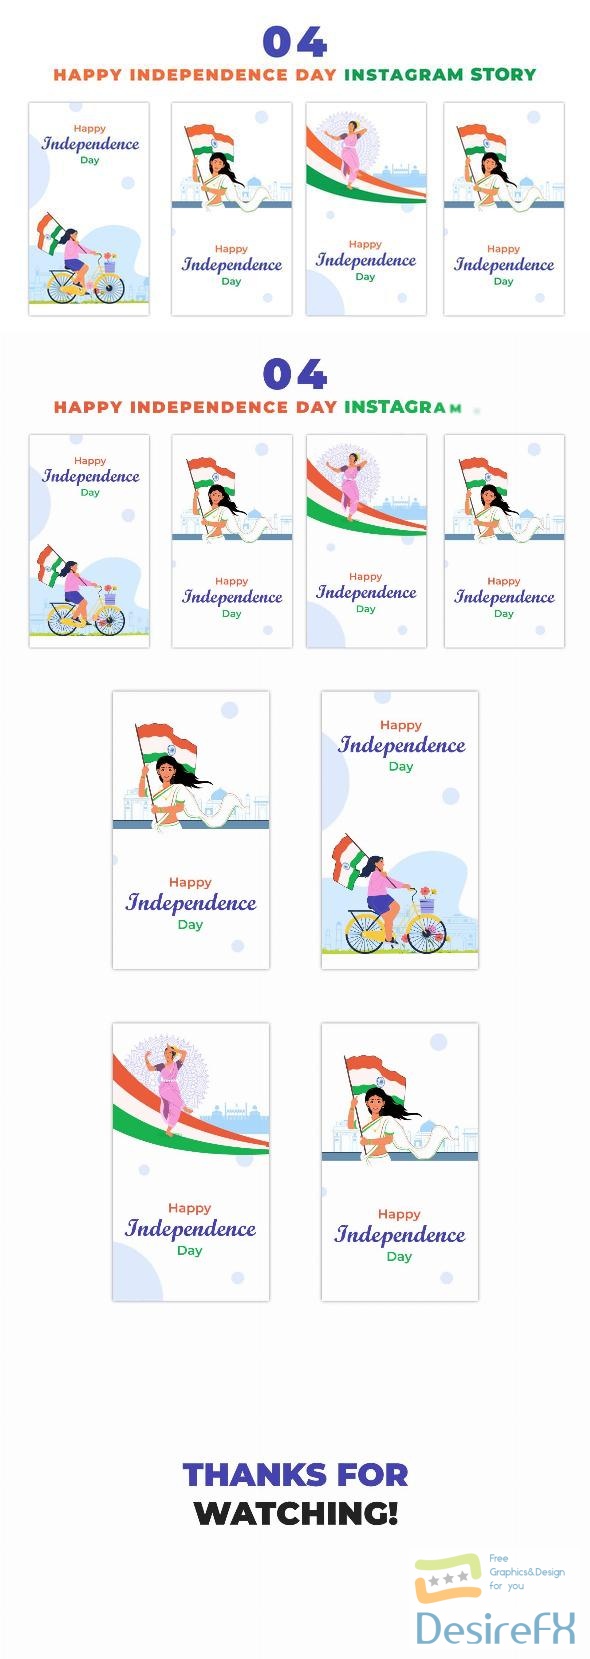 VideoHive Creative Indian Independence Day Flat Characters Instagram Story 47440061